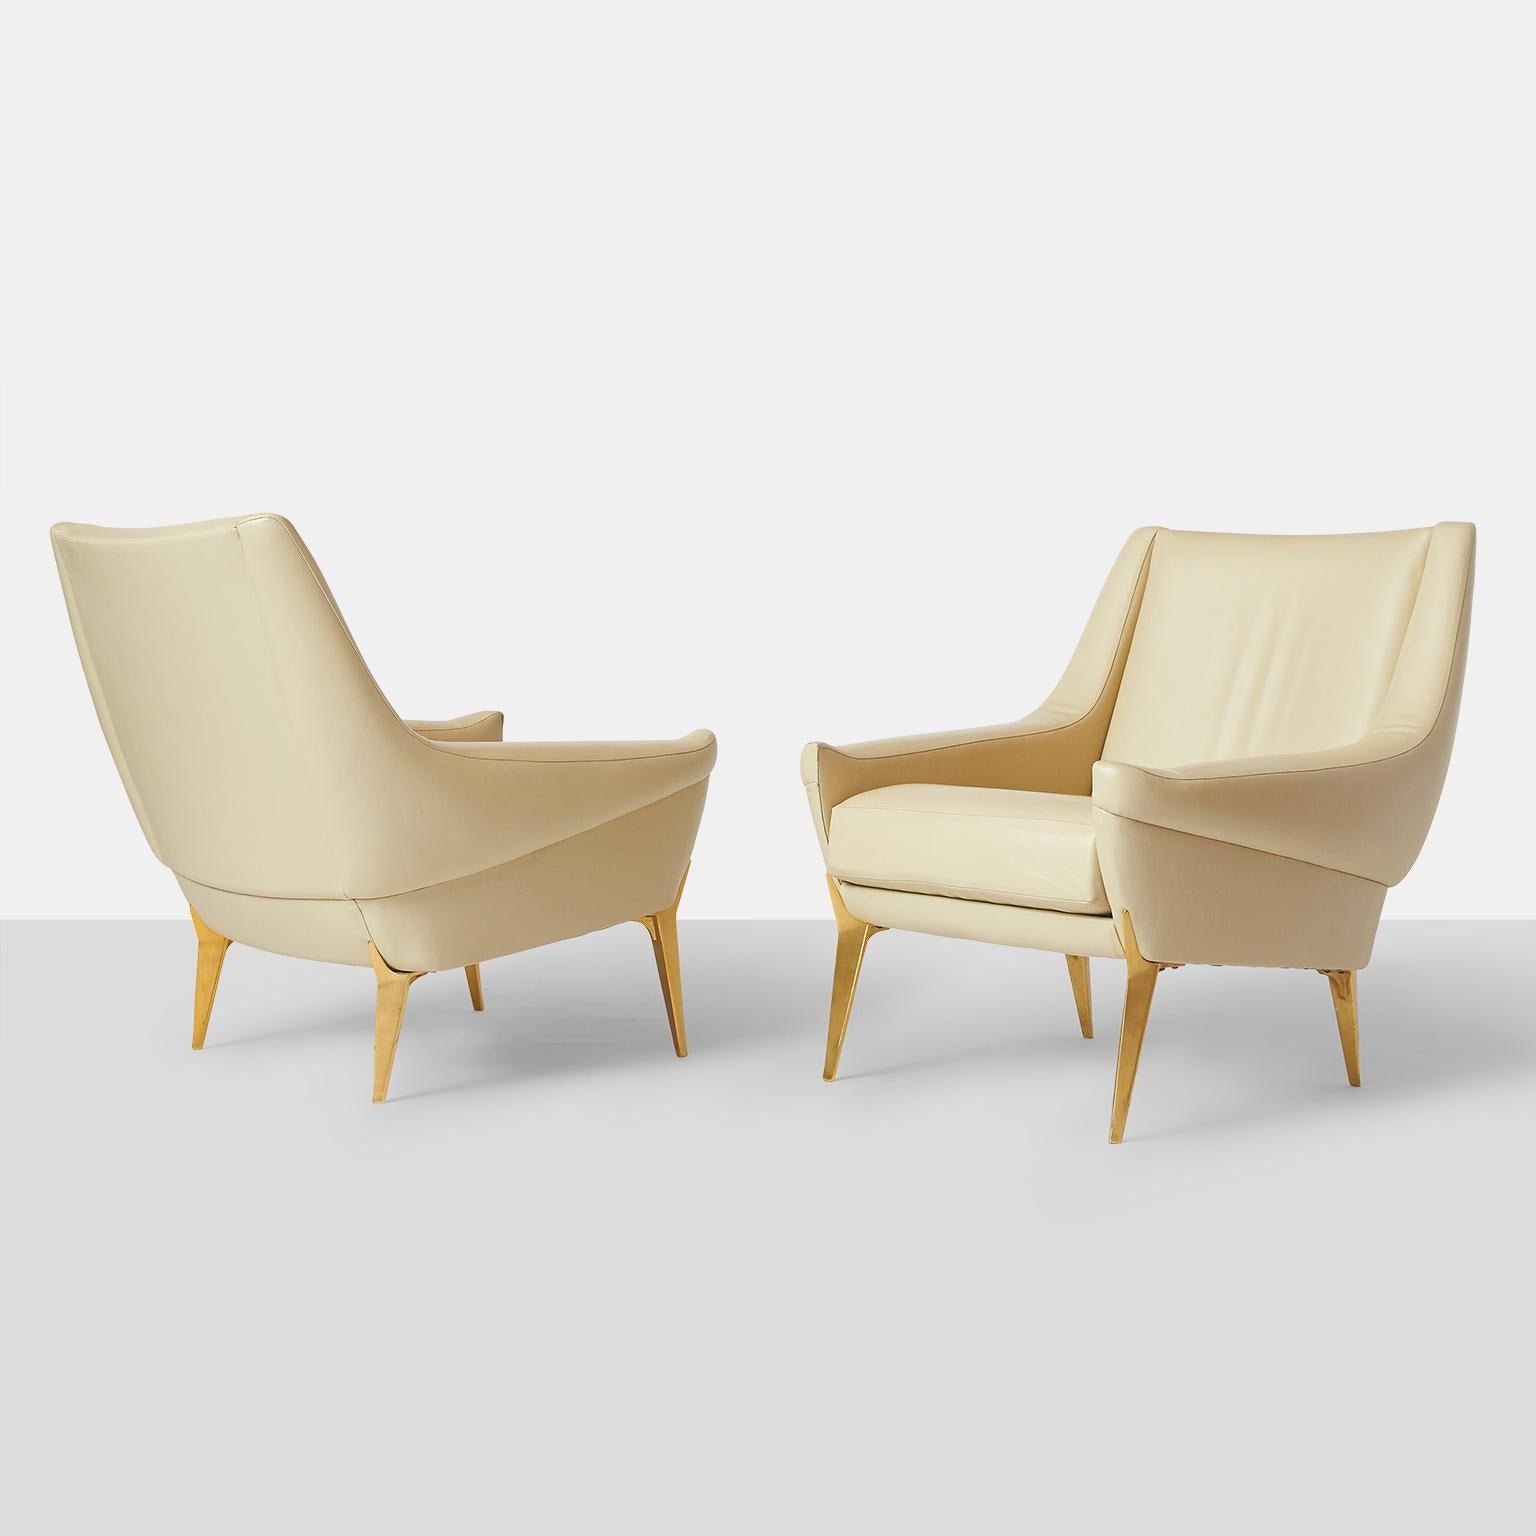 Pair of lounge chairs by Charles Ramos
A rare set of lounge chairs in ivory leather with tapered gilt metal legs.
Edited by Castellaneta
France, circa 1950.